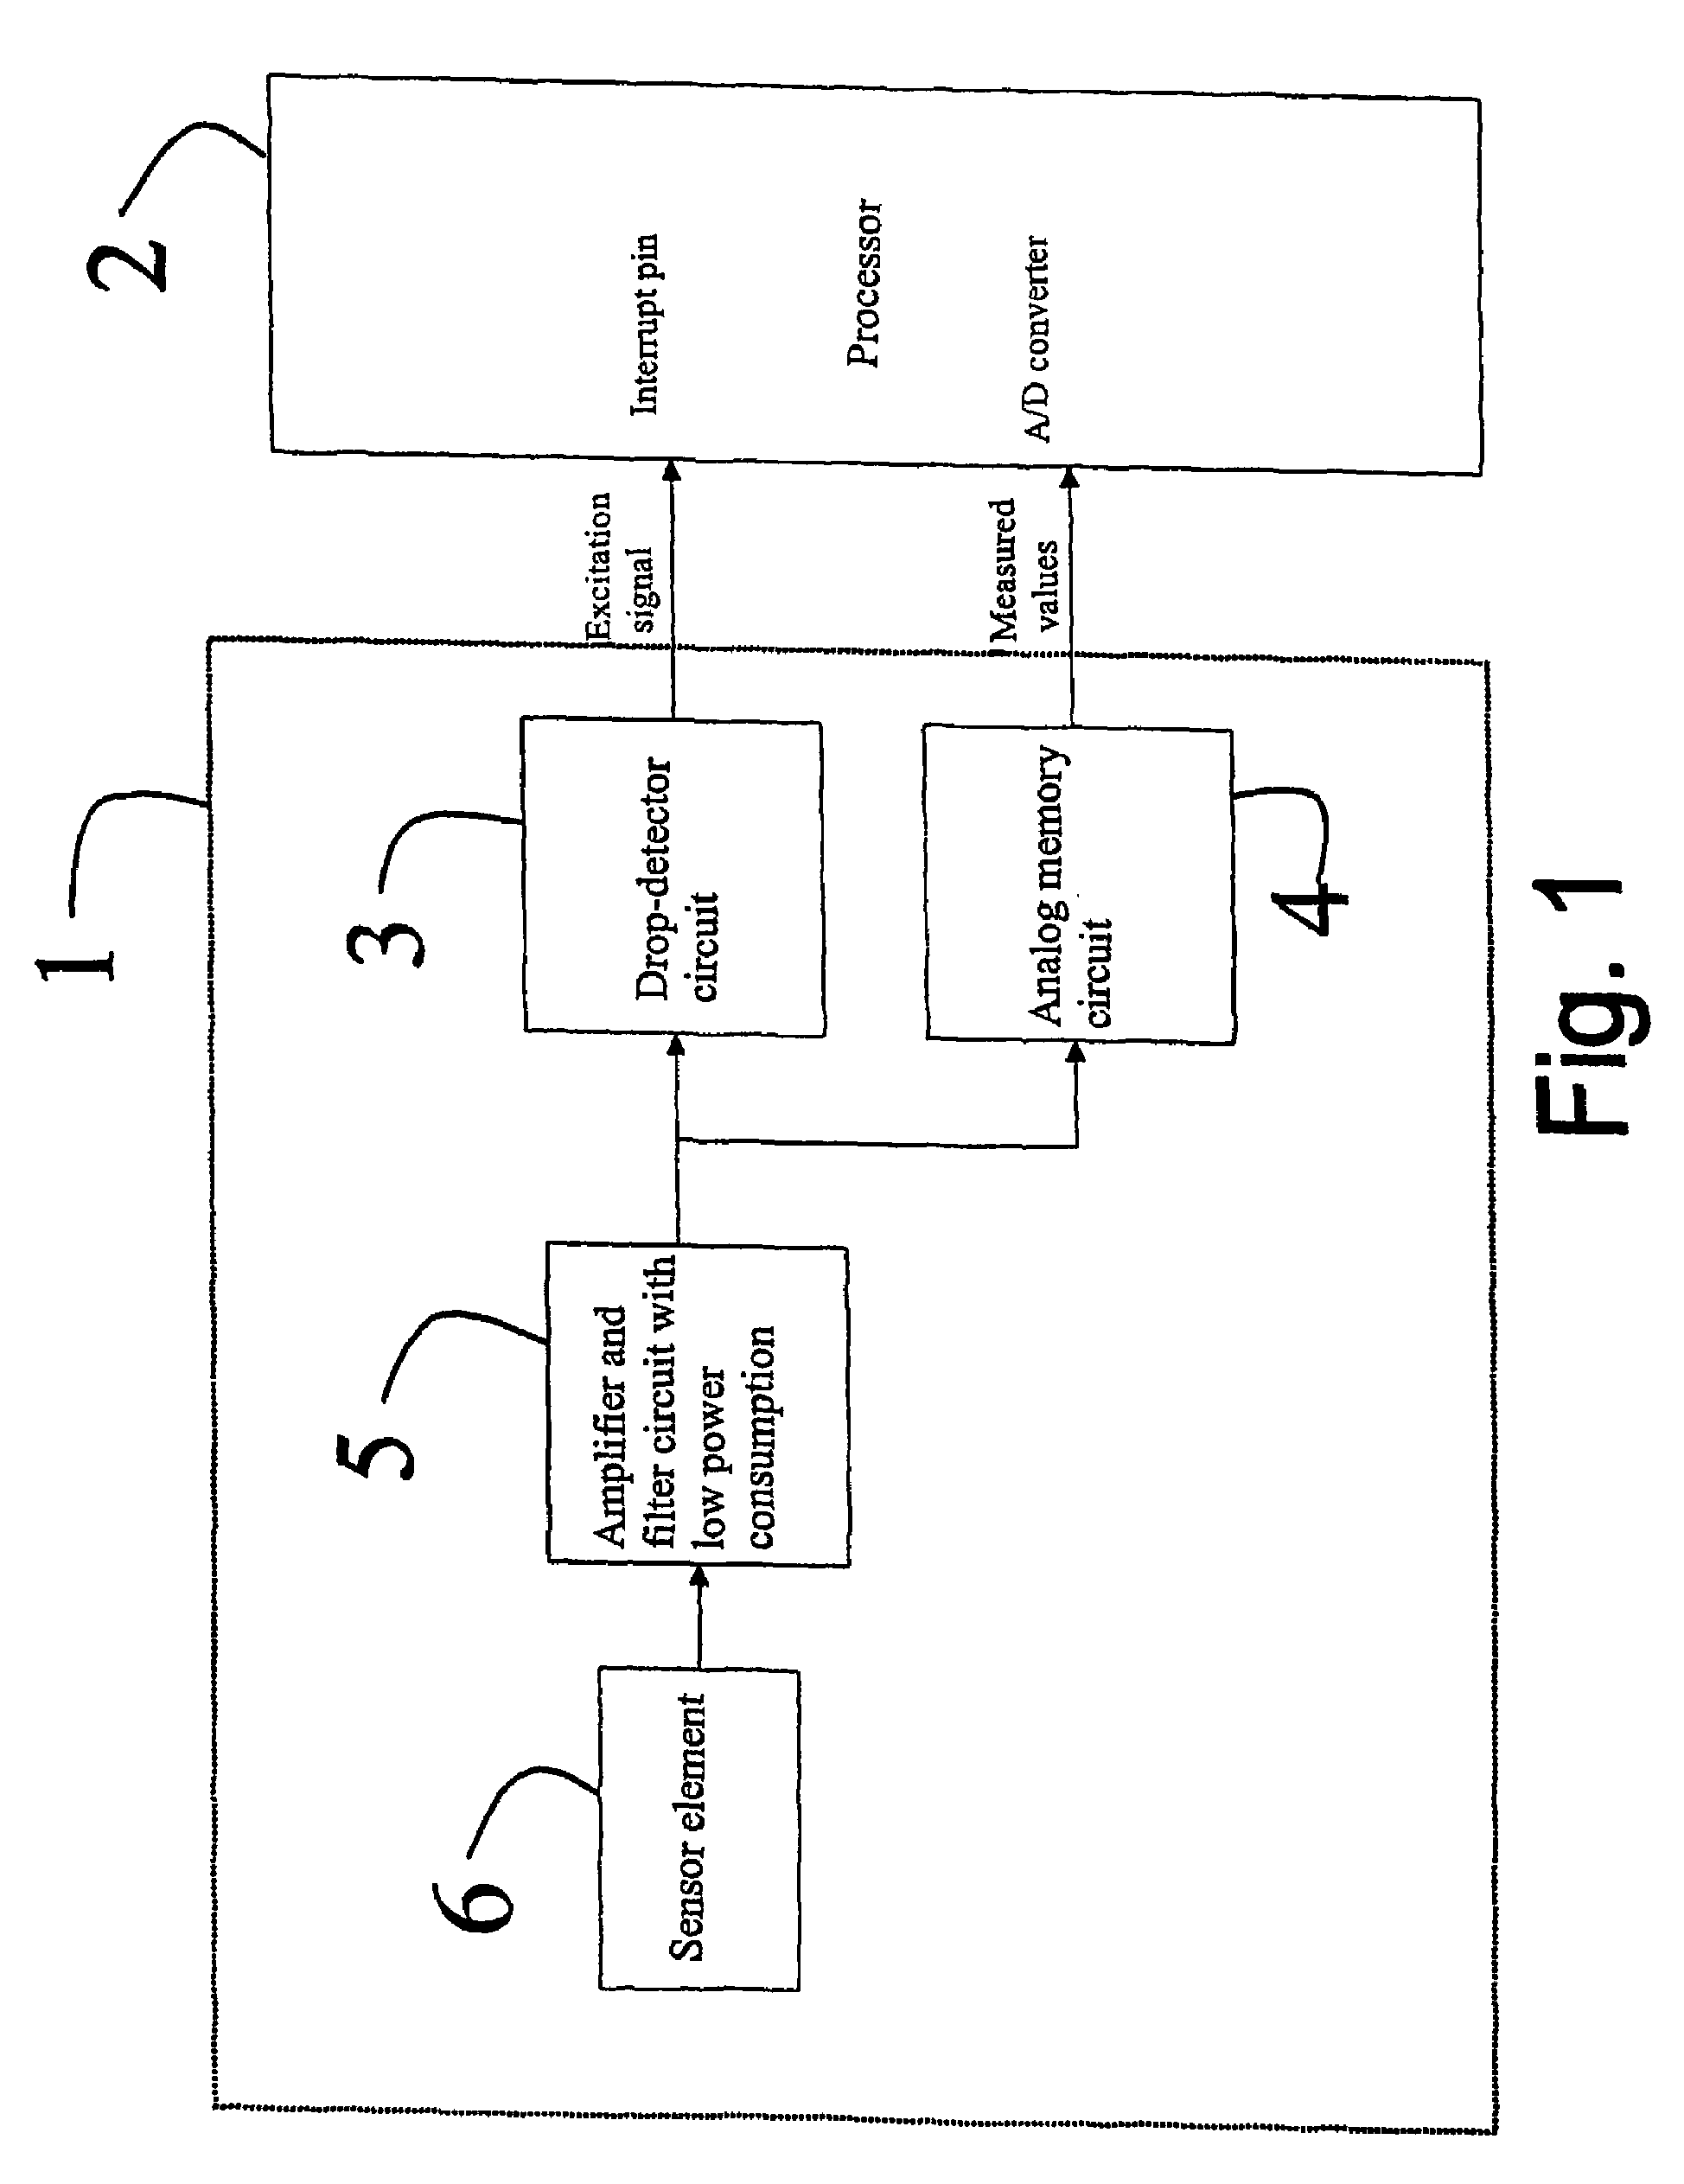 Method and device for hydrometeor detection